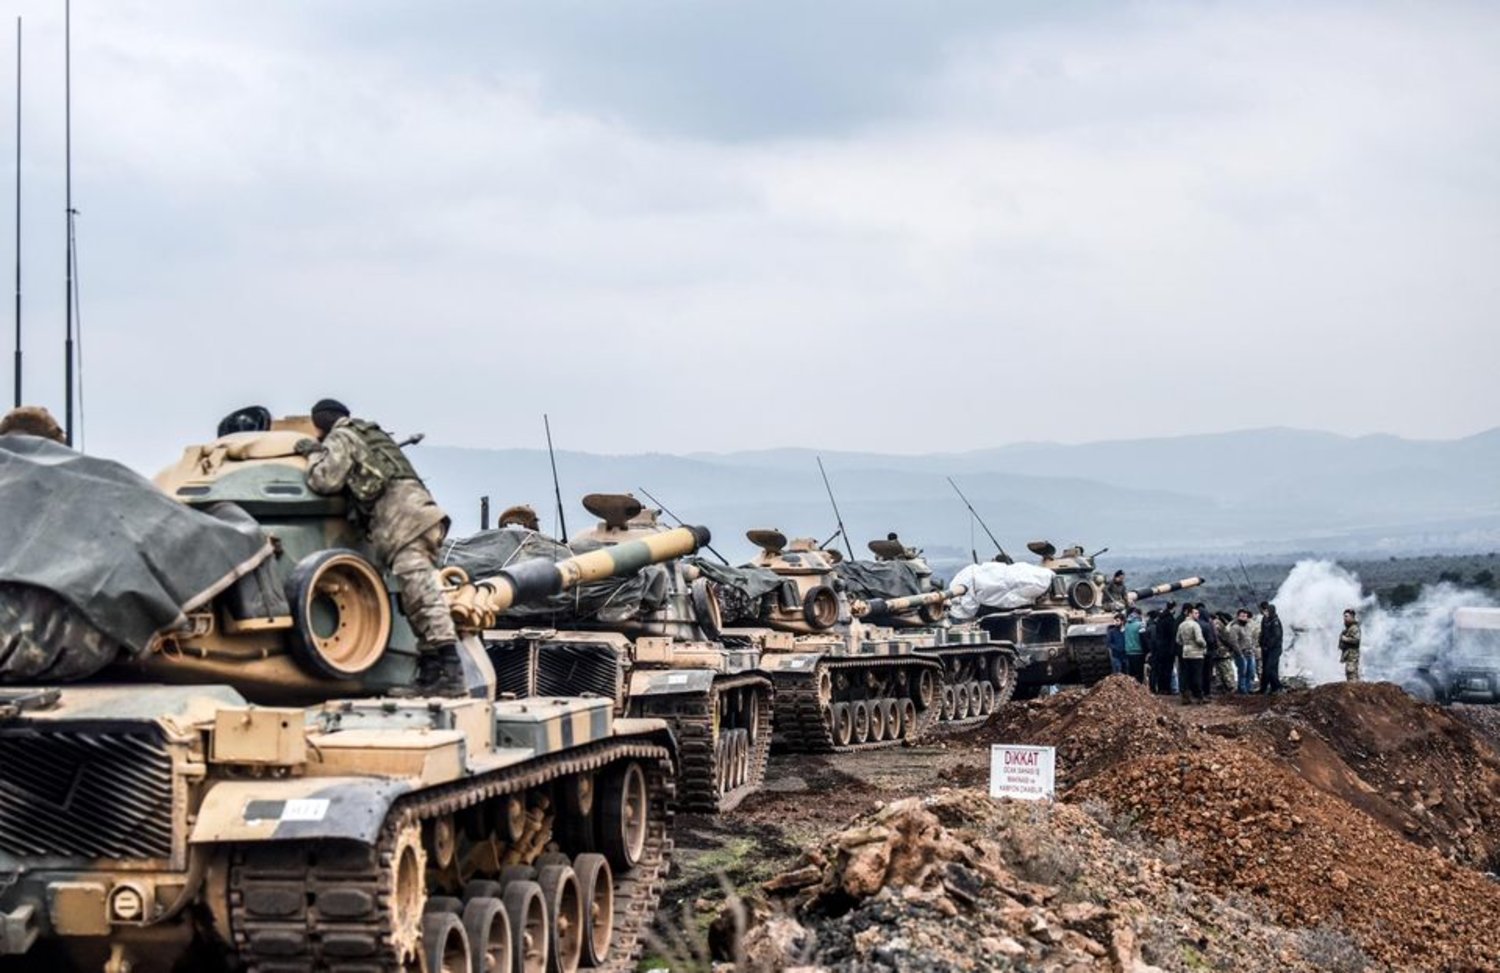 Turkish troops gather near the Syrian border at Hassa, in Hatay province on January 21, 2018. (AFP)